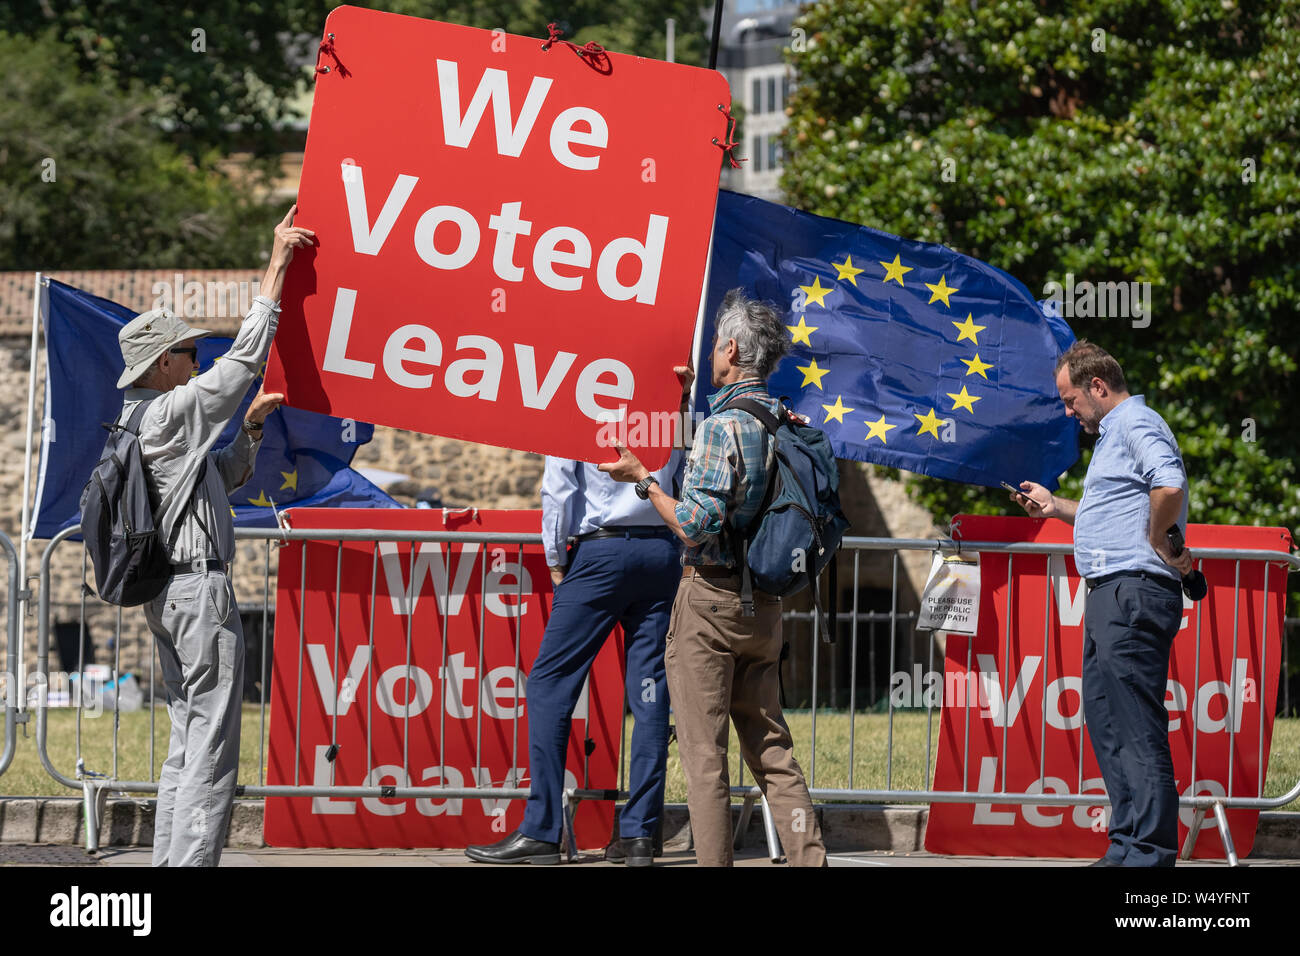 Pro-Brexit and EU Remain supporters continue their weekly campaign vigils opposite the Houses of Parliament waving British and European flags. London, Stock Photo